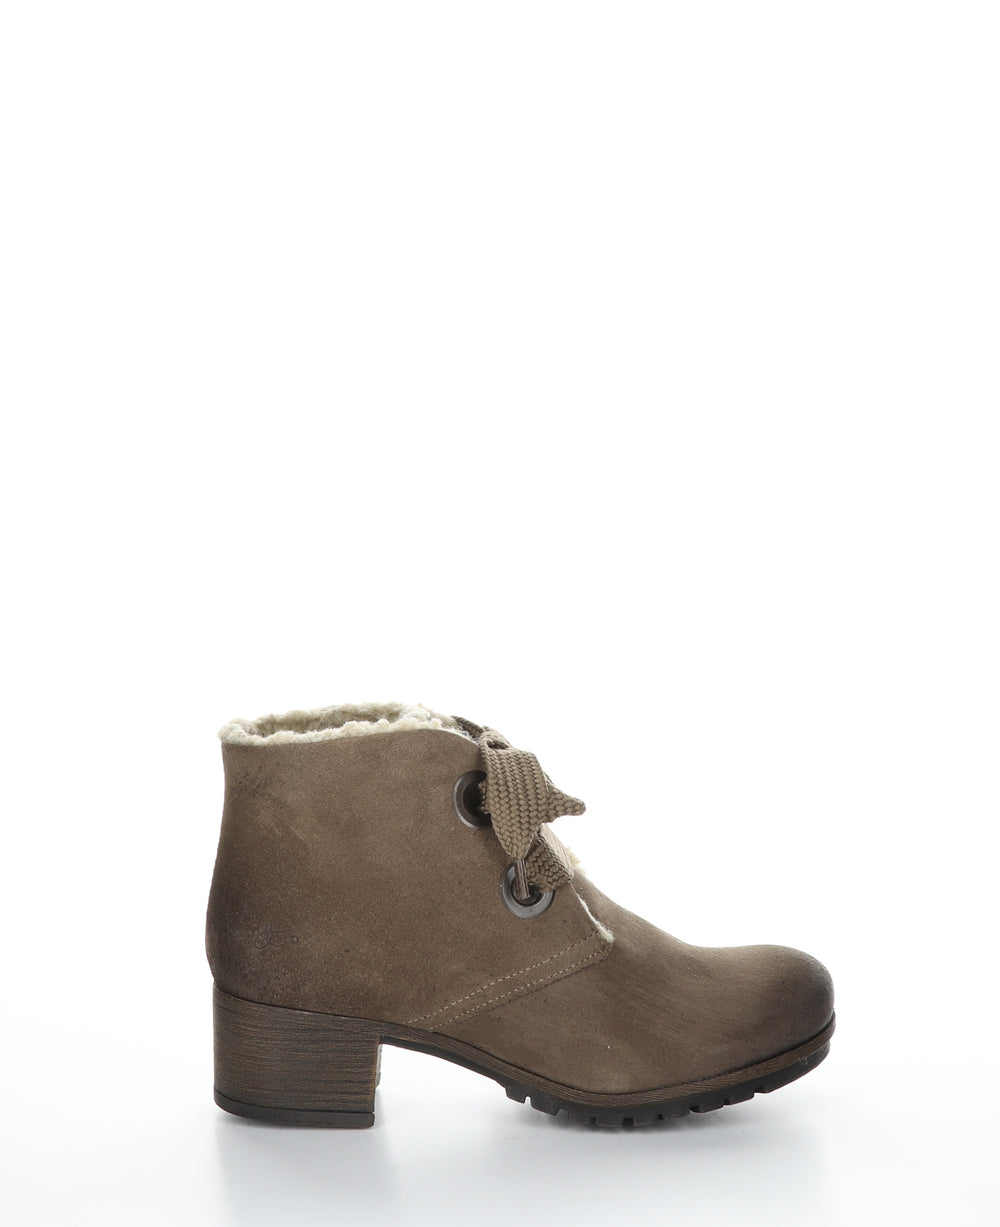 MANX Taupe Round Toe Ankle Boots|MANX Bottines à Bout Rond in Beige